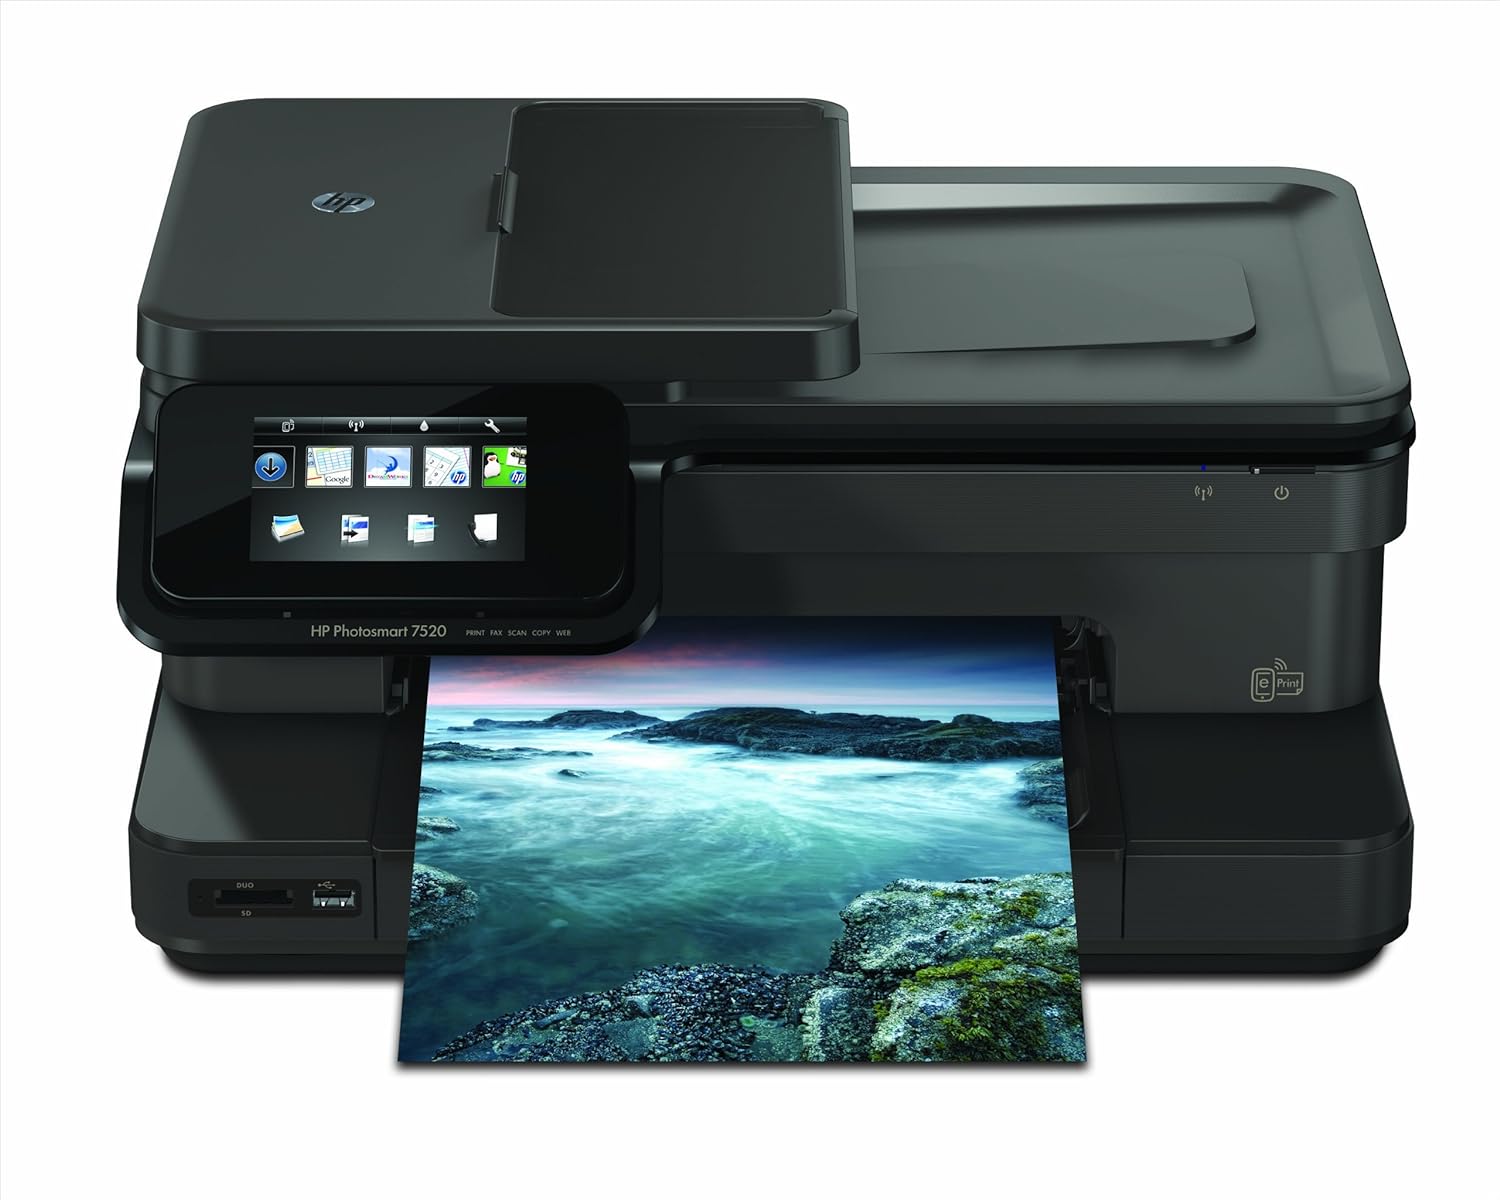 HP Photosmart 7520 Wireless Color Photo Printer with Scanner, Copier and Fax